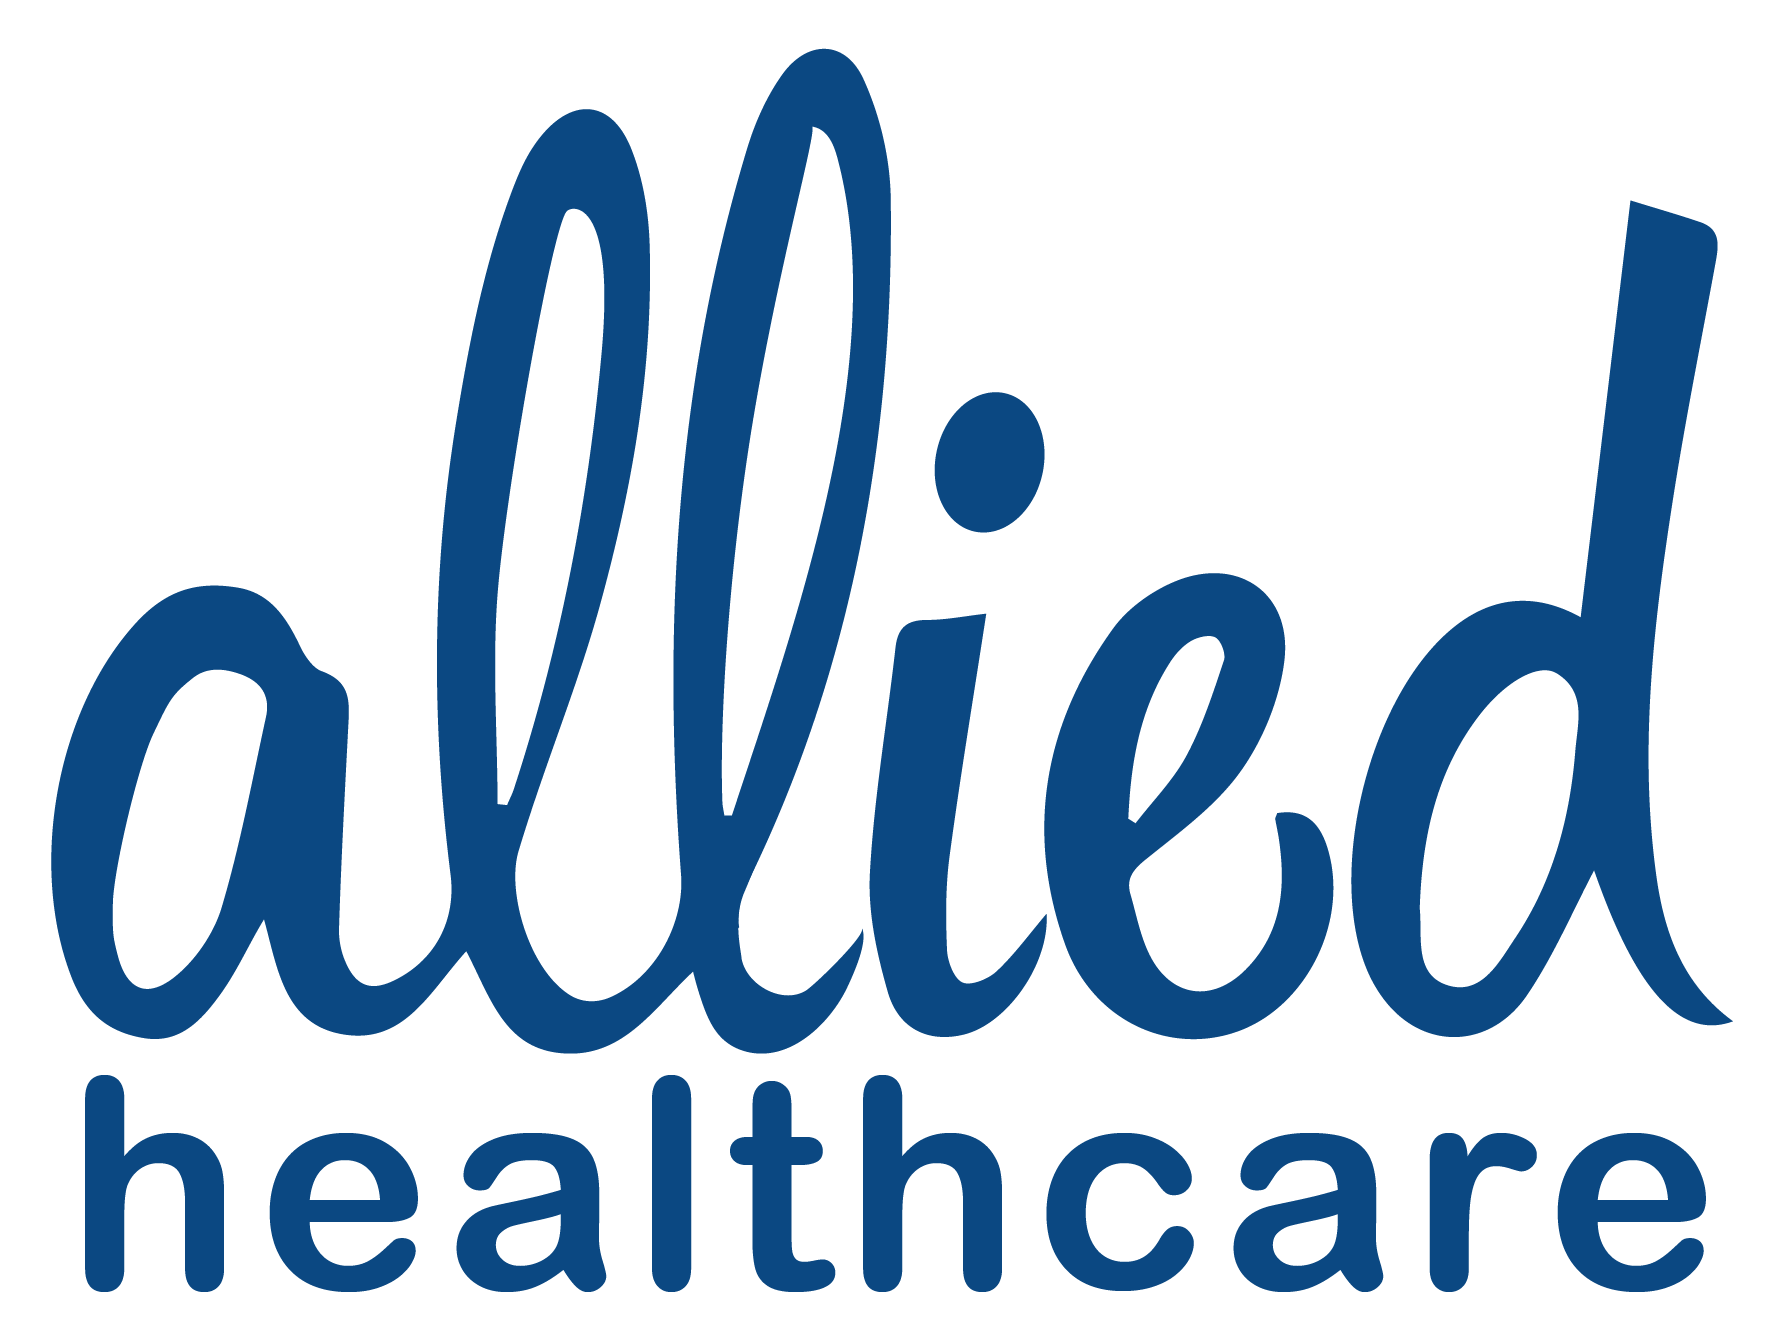 Health Care Logo - Allied Healthcare. Care and support services to live your life